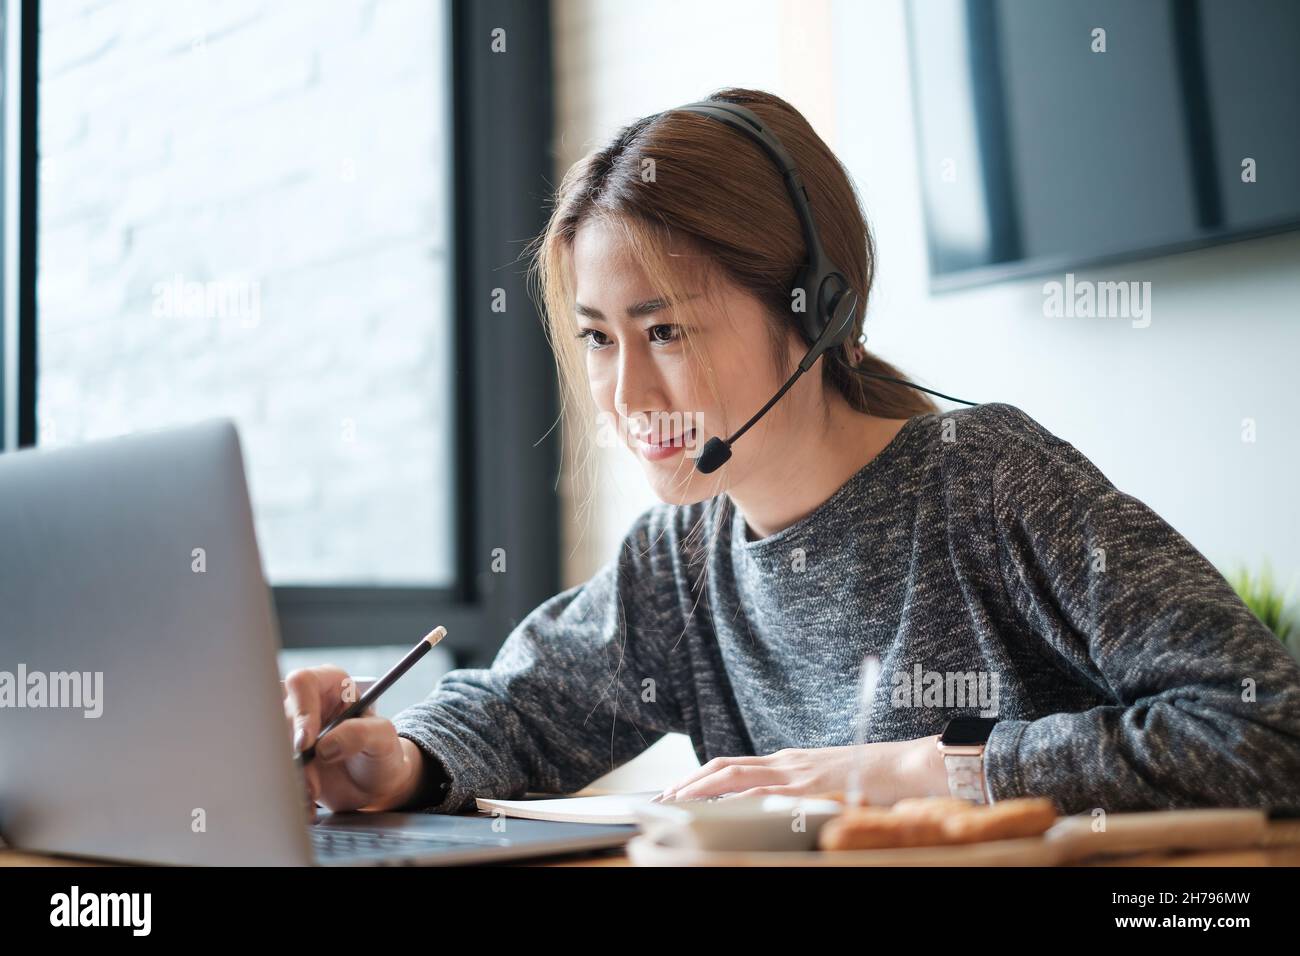 Customer service representative with a headset and work at home. business support team concept. Stock Photo